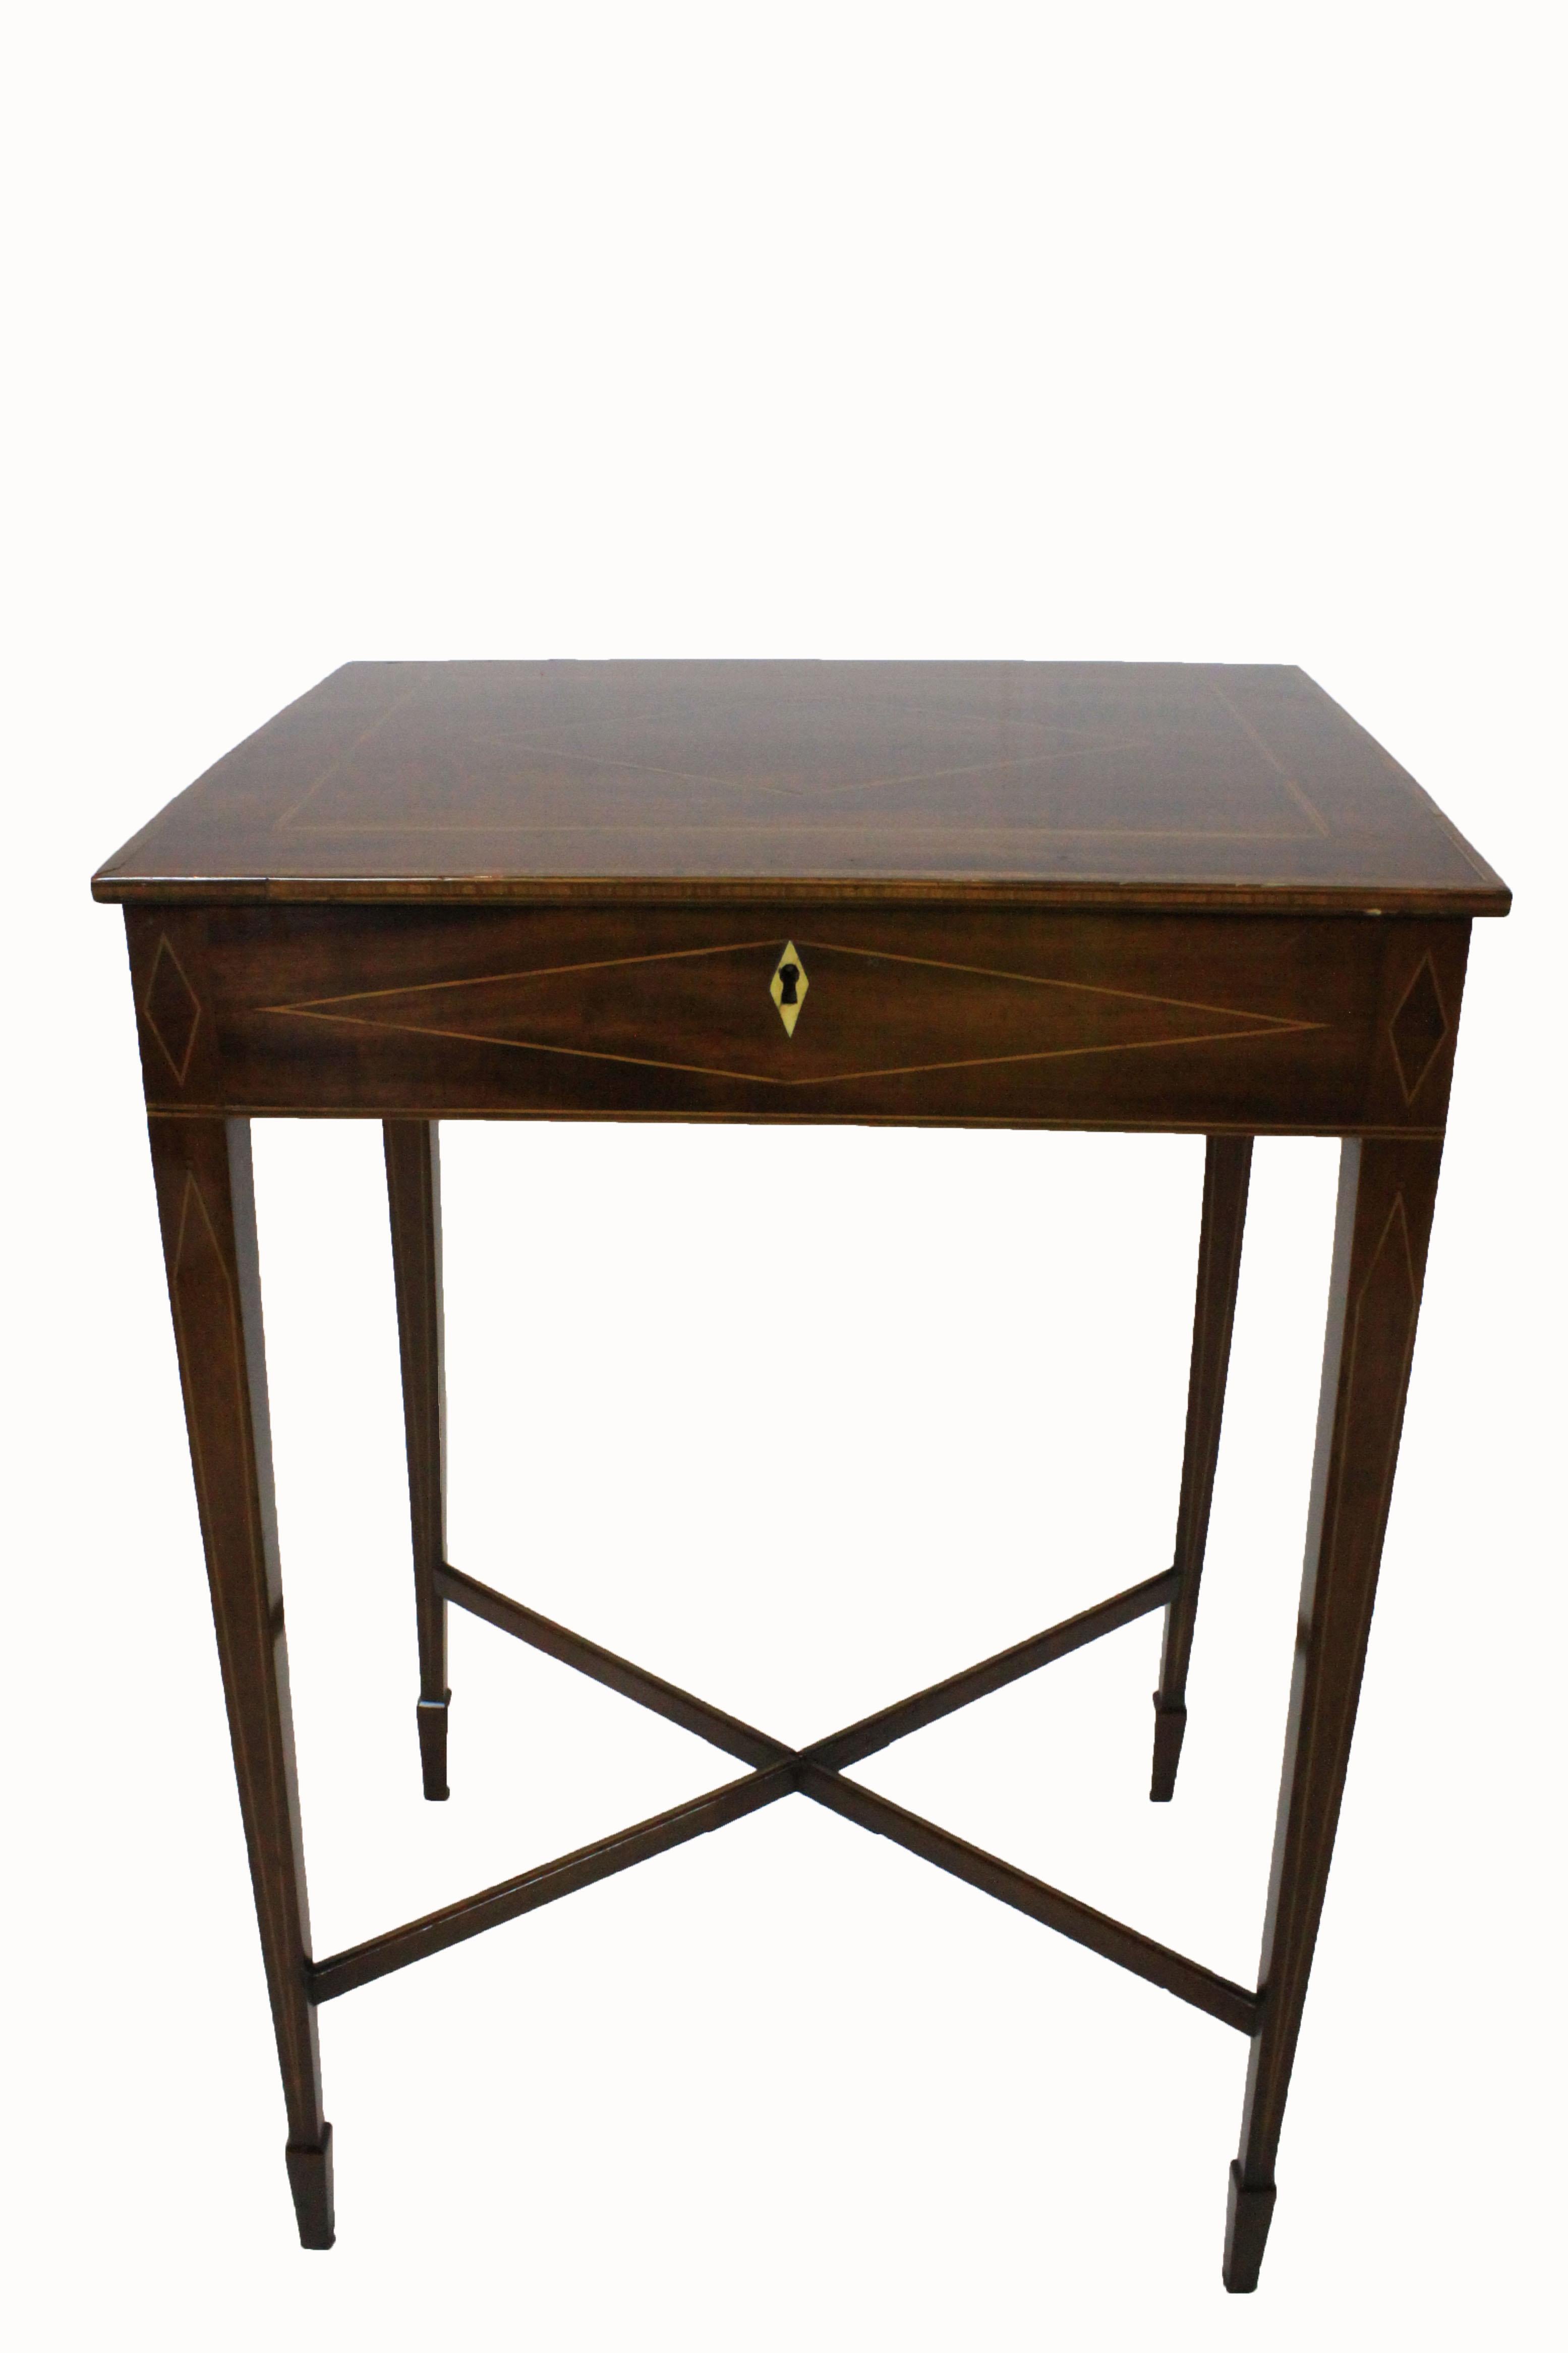 George III mahogany inlaid occasional table standing on square tapered legs ending in spade feet with cross stretchers. The lift top features boxwood stringing, narrow crossbanding and a boxwood and satinwood diamond shaped inlay. The diamond design